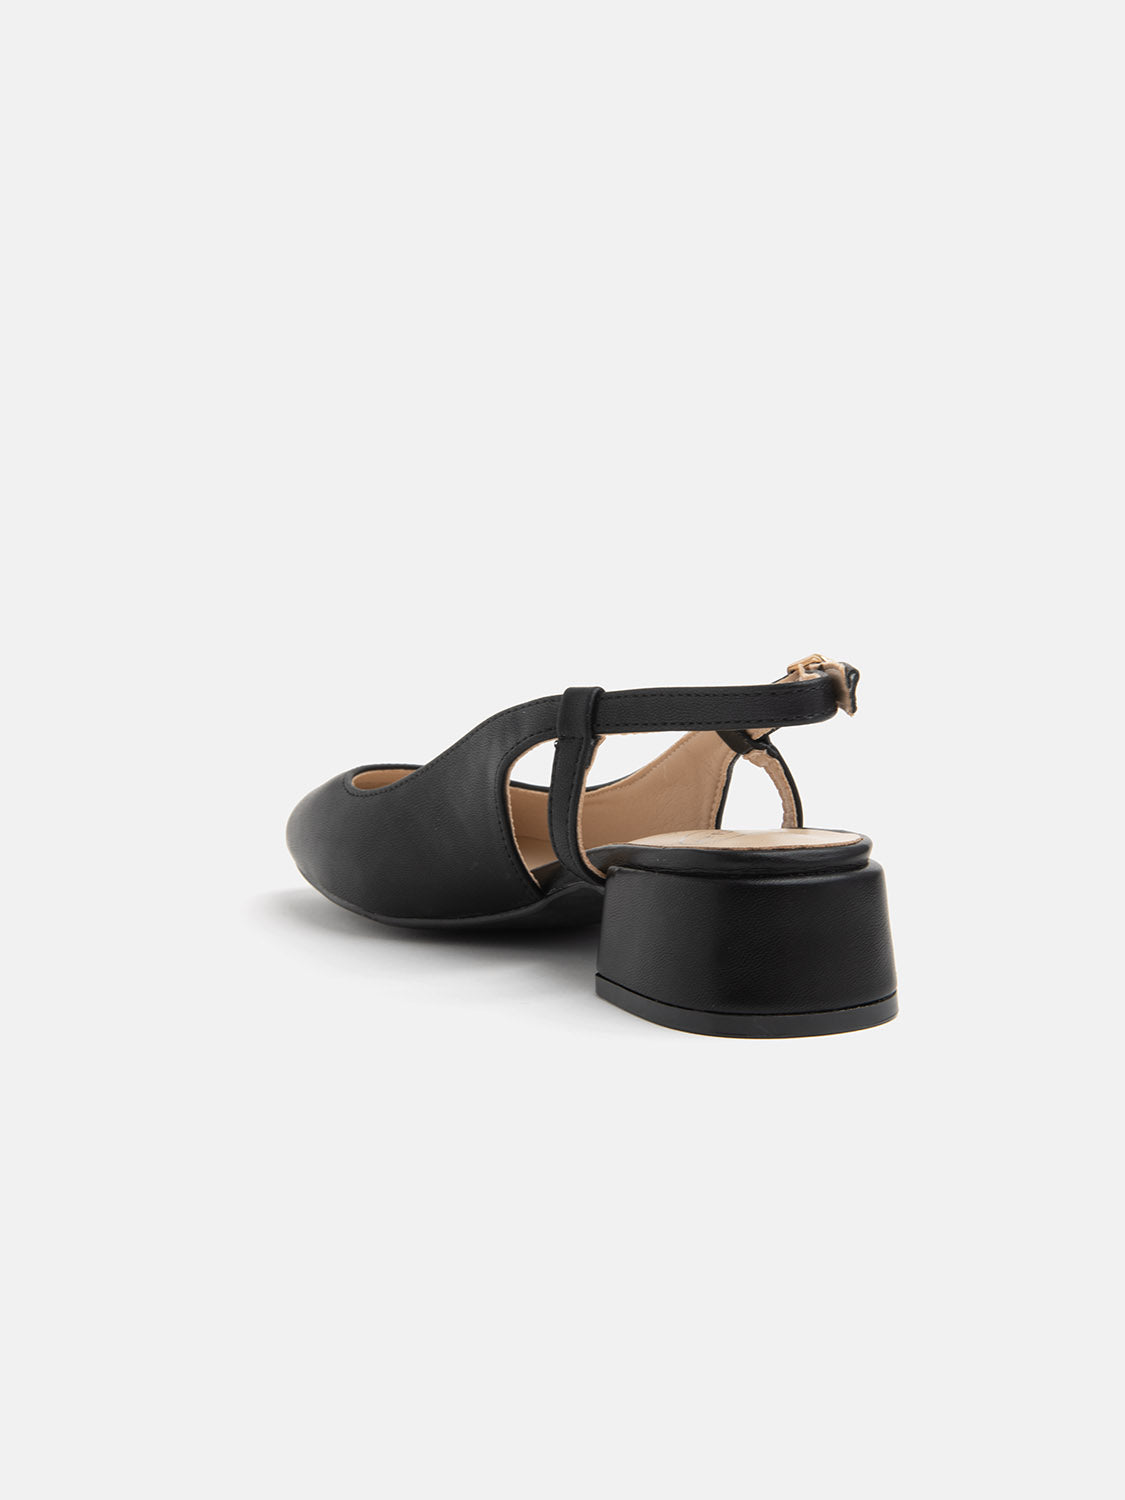 Slinbgback pump with rounded toe - BLACK